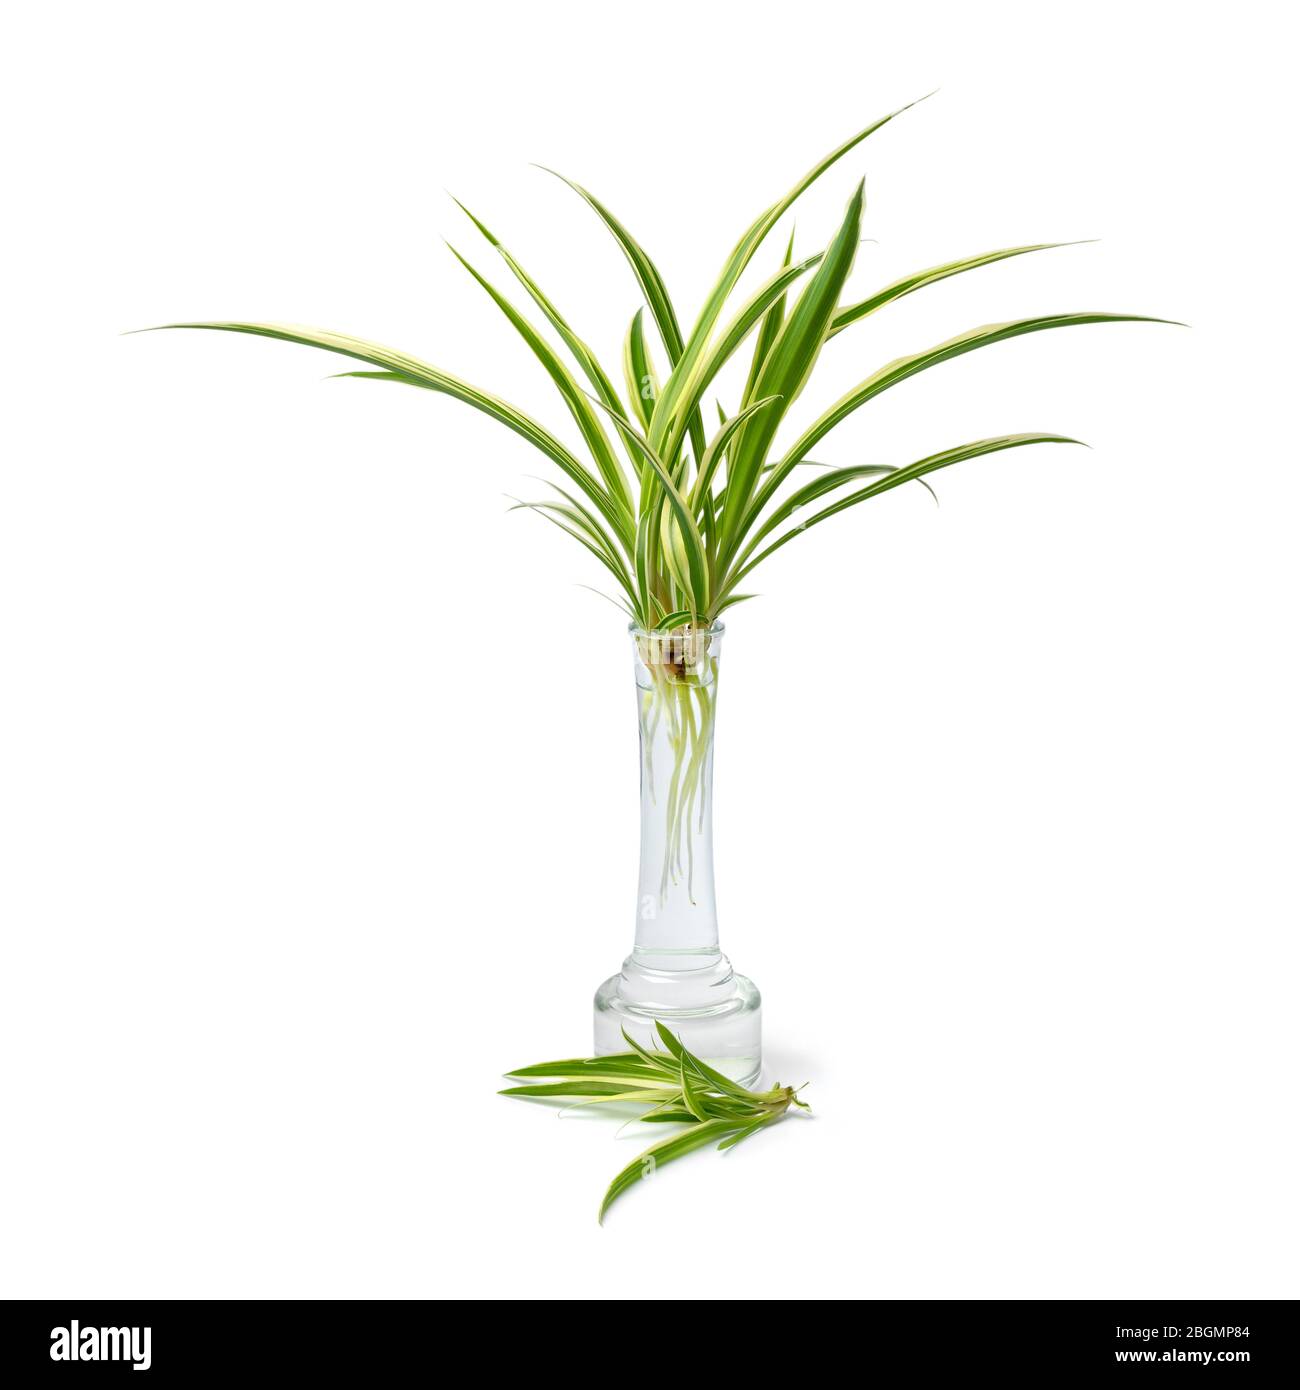 Chlorophytum Comosum Spider Plant Growing Roots In A Glass Vase Isolated On White Background Stock Photo Alamy